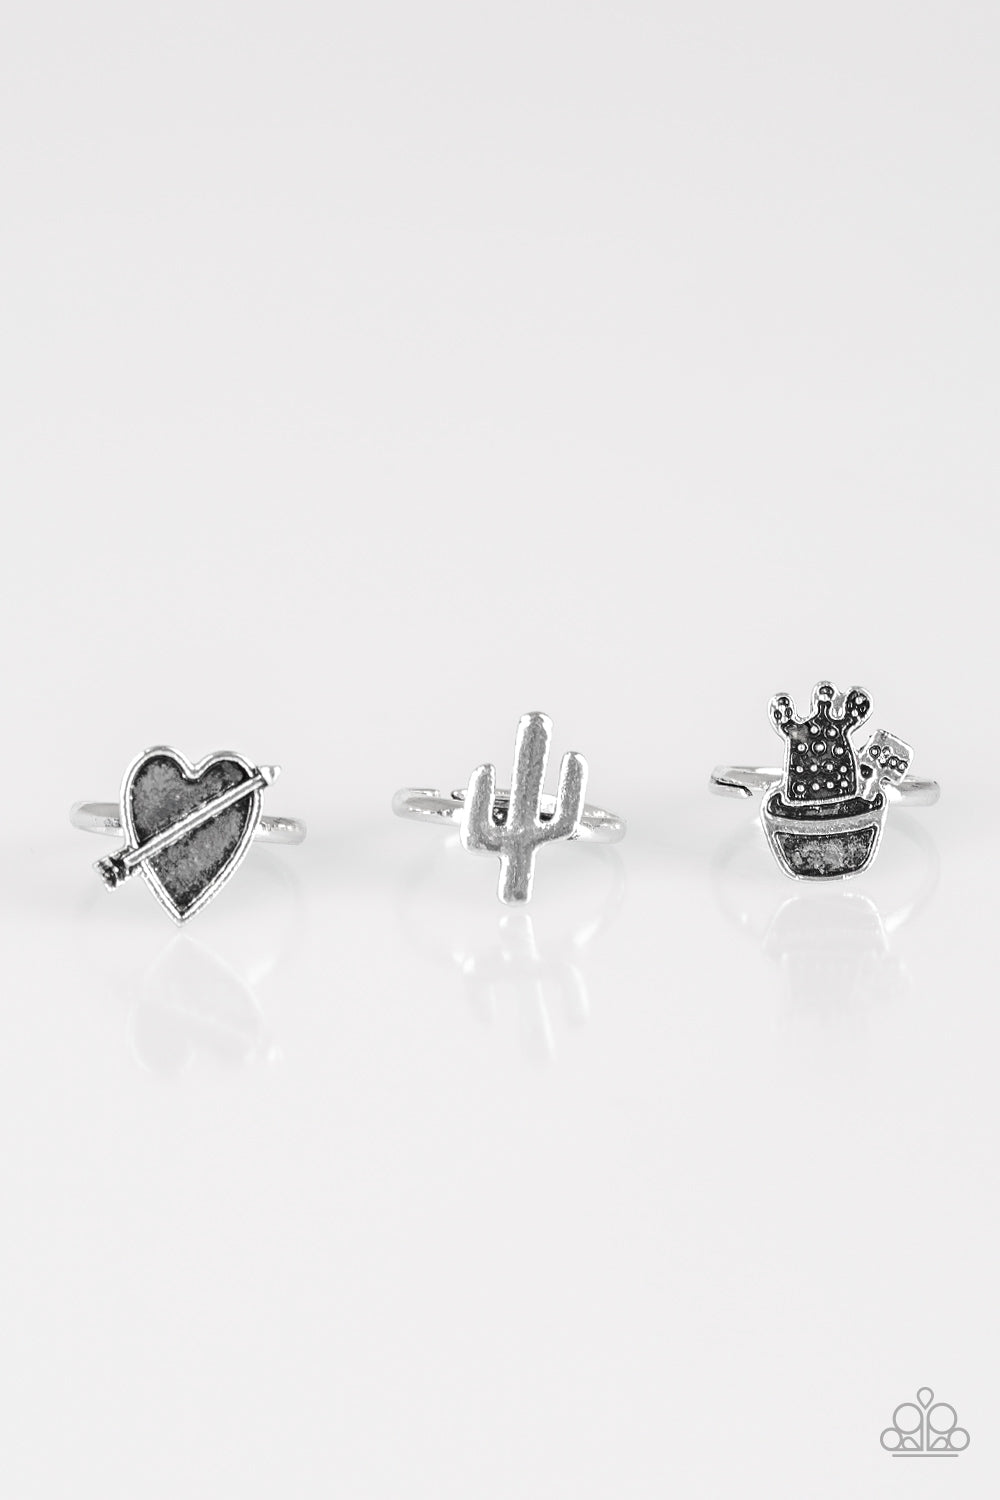 Paparazzi Starlet Shimmer Rings - 10 - Heart, Cactus, Crown, Feather - $5 Jewelry With Ashley Swint